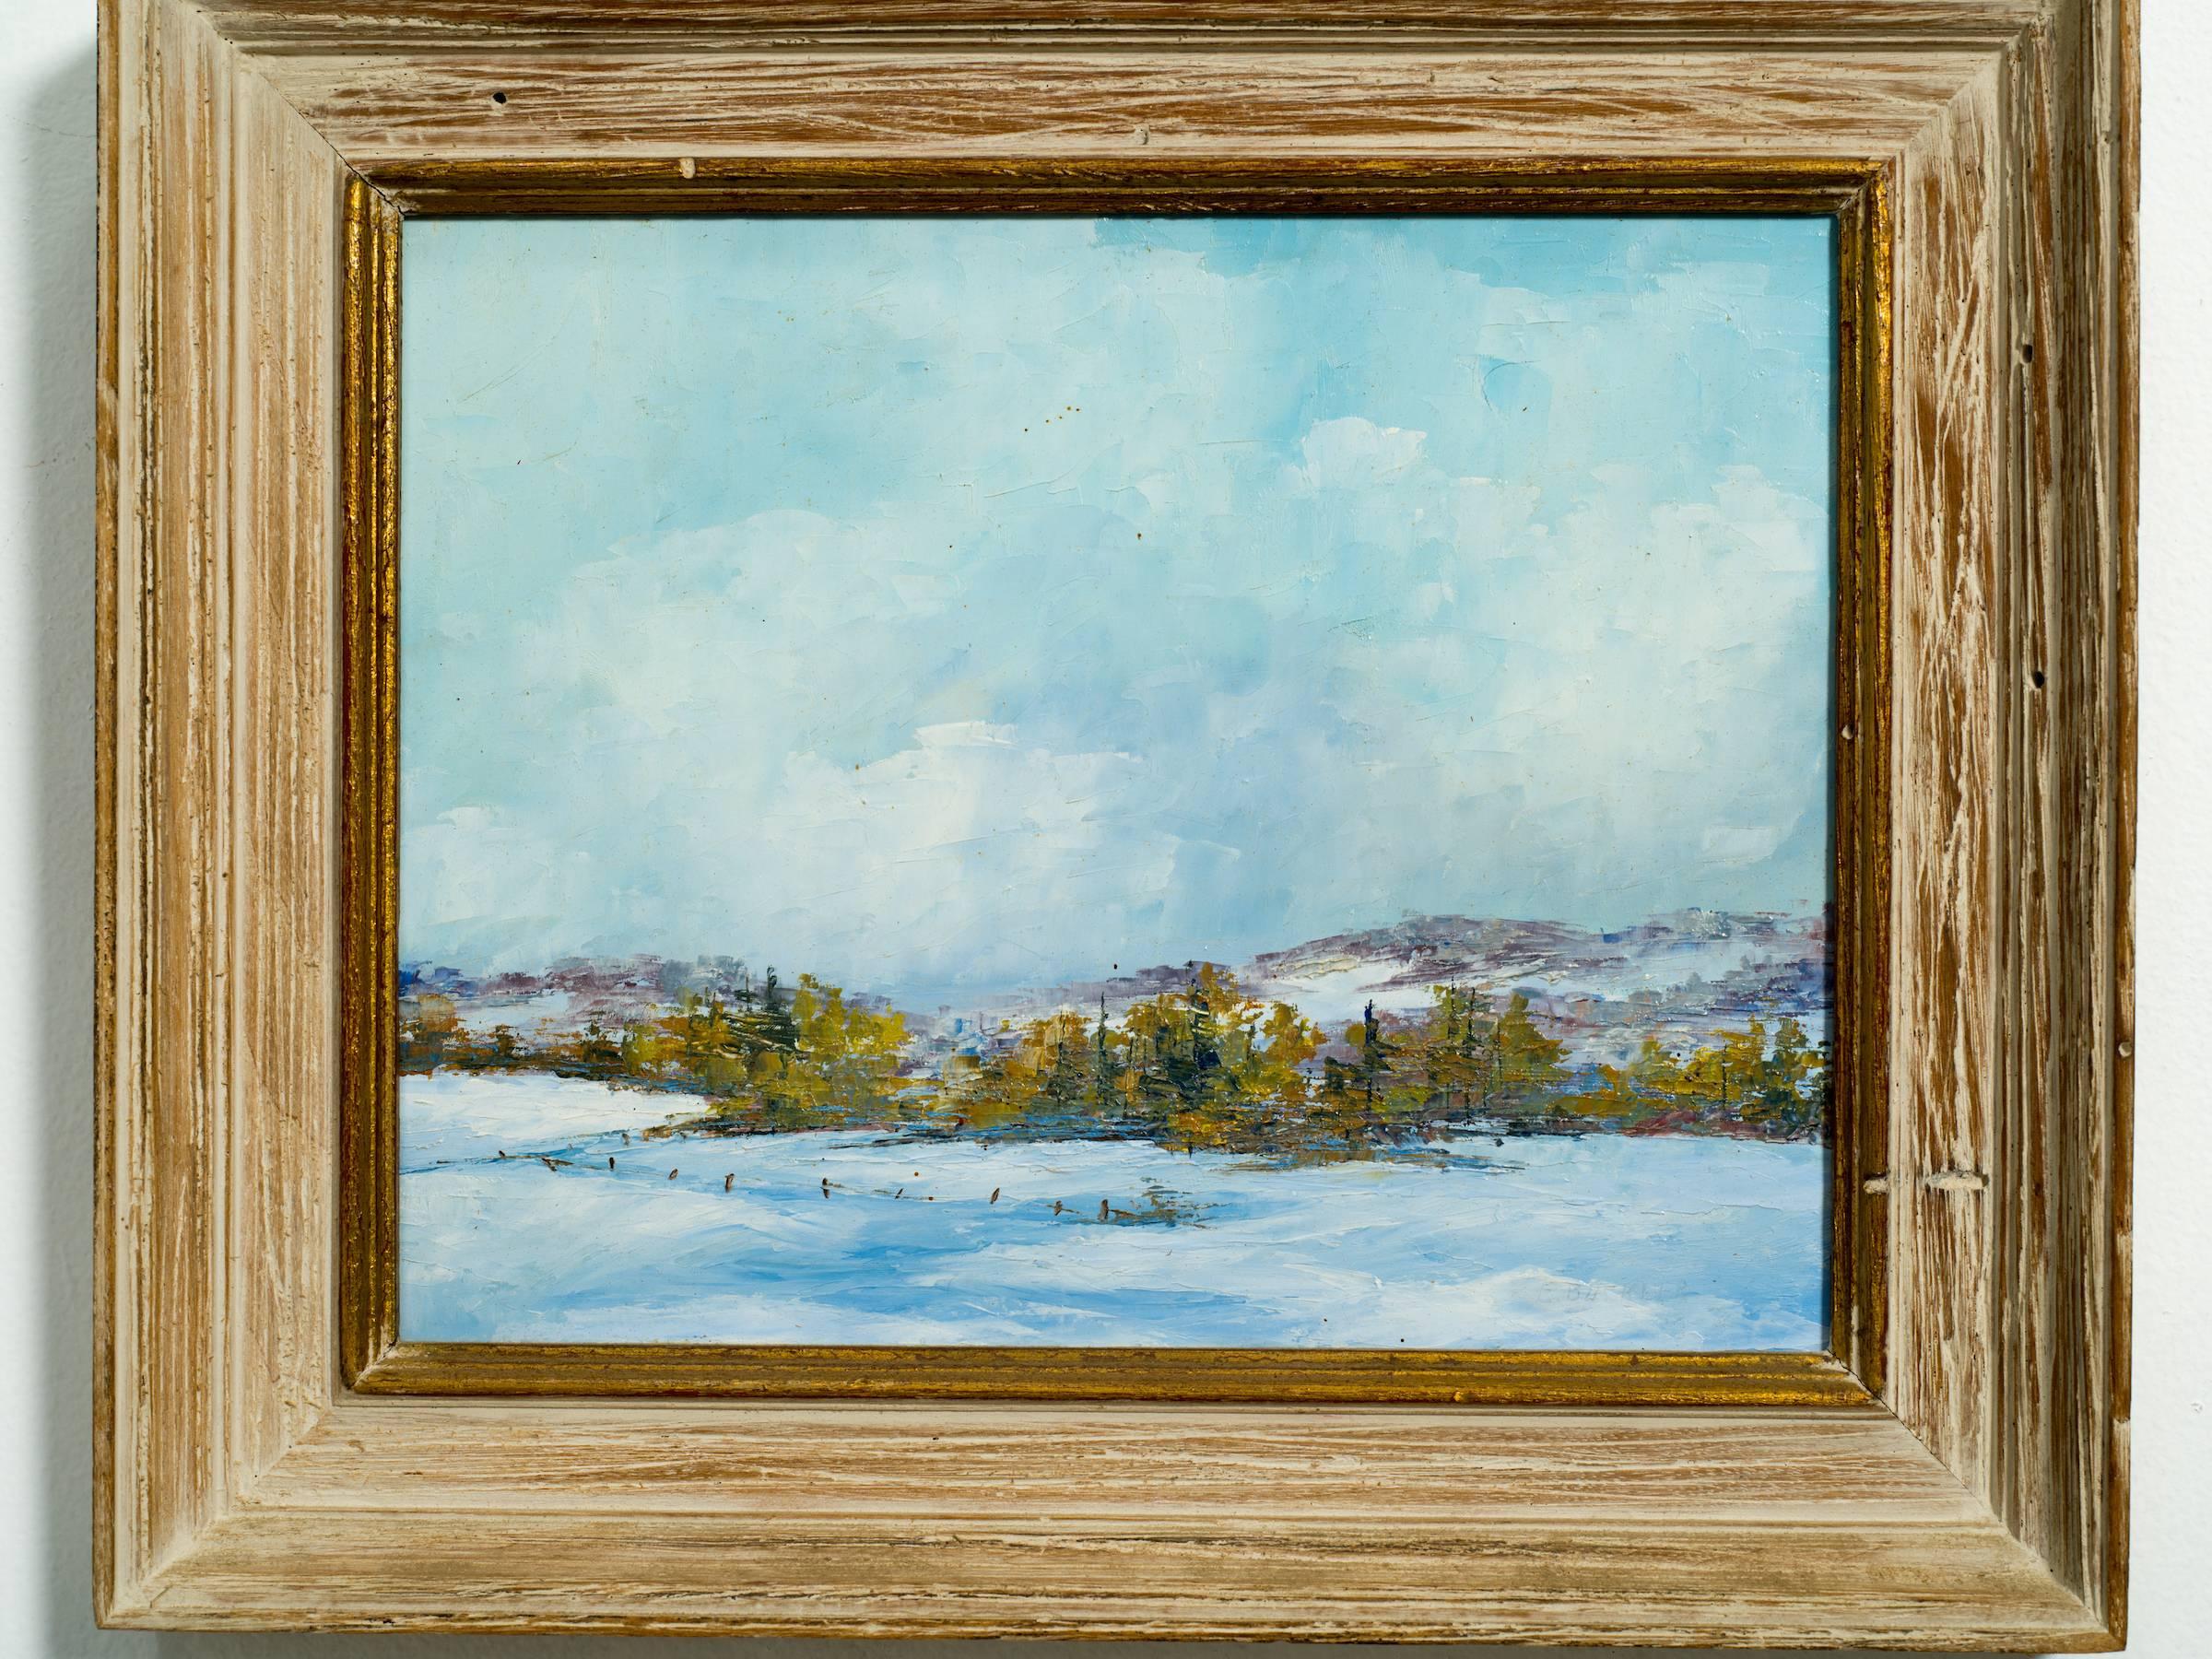 1950s small oil on board of a landscape, bought from Lord and Taylor.